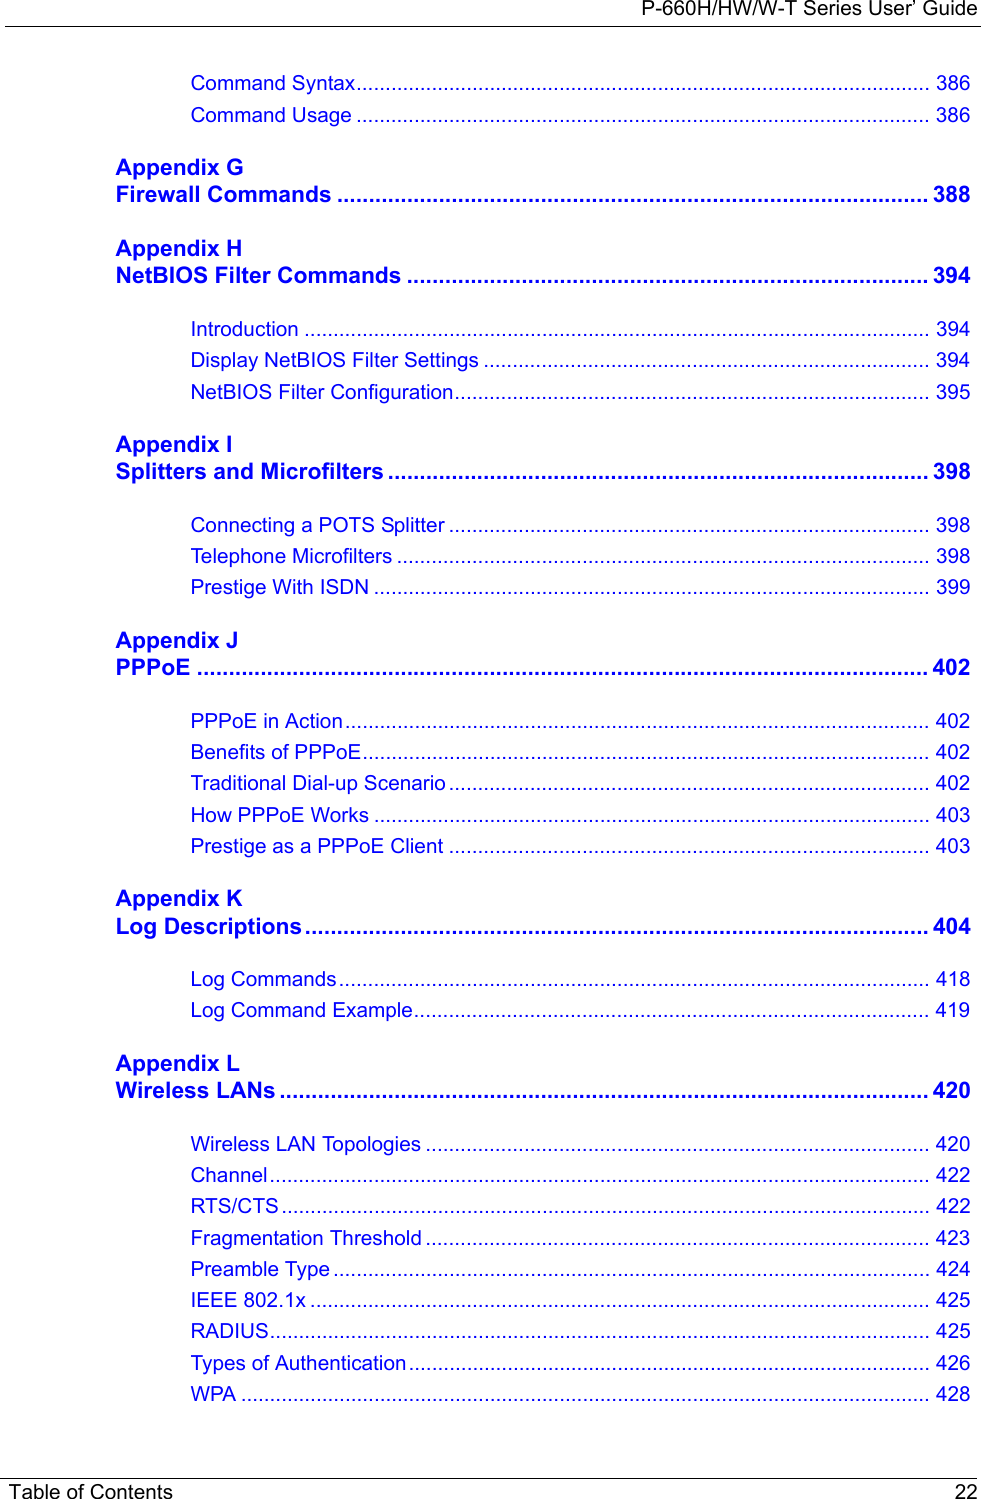 P-660H/HW/W-T Series User’ GuideTable of Contents 22Command Syntax................................................................................................... 386Command Usage ................................................................................................... 386Appendix GFirewall Commands ............................................................................................. 388Appendix HNetBIOS Filter Commands .................................................................................. 394Introduction ............................................................................................................ 394Display NetBIOS Filter Settings ............................................................................. 394NetBIOS Filter Configuration.................................................................................. 395Appendix ISplitters and Microfilters ..................................................................................... 398Connecting a POTS Splitter ................................................................................... 398Telephone Microfilters ............................................................................................ 398Prestige With ISDN ................................................................................................ 399Appendix JPPPoE ................................................................................................................... 402PPPoE in Action..................................................................................................... 402Benefits of PPPoE.................................................................................................. 402Traditional Dial-up Scenario ................................................................................... 402How PPPoE Works ................................................................................................ 403Prestige as a PPPoE Client ................................................................................... 403Appendix KLog Descriptions.................................................................................................. 404Log Commands...................................................................................................... 418Log Command Example......................................................................................... 419Appendix LWireless LANs ...................................................................................................... 420Wireless LAN Topologies ....................................................................................... 420Channel.................................................................................................................. 422RTS/CTS................................................................................................................ 422Fragmentation Threshold ....................................................................................... 423Preamble Type ....................................................................................................... 424IEEE 802.1x ........................................................................................................... 425RADIUS.................................................................................................................. 425Types of Authentication.......................................................................................... 426WPA ....................................................................................................................... 428